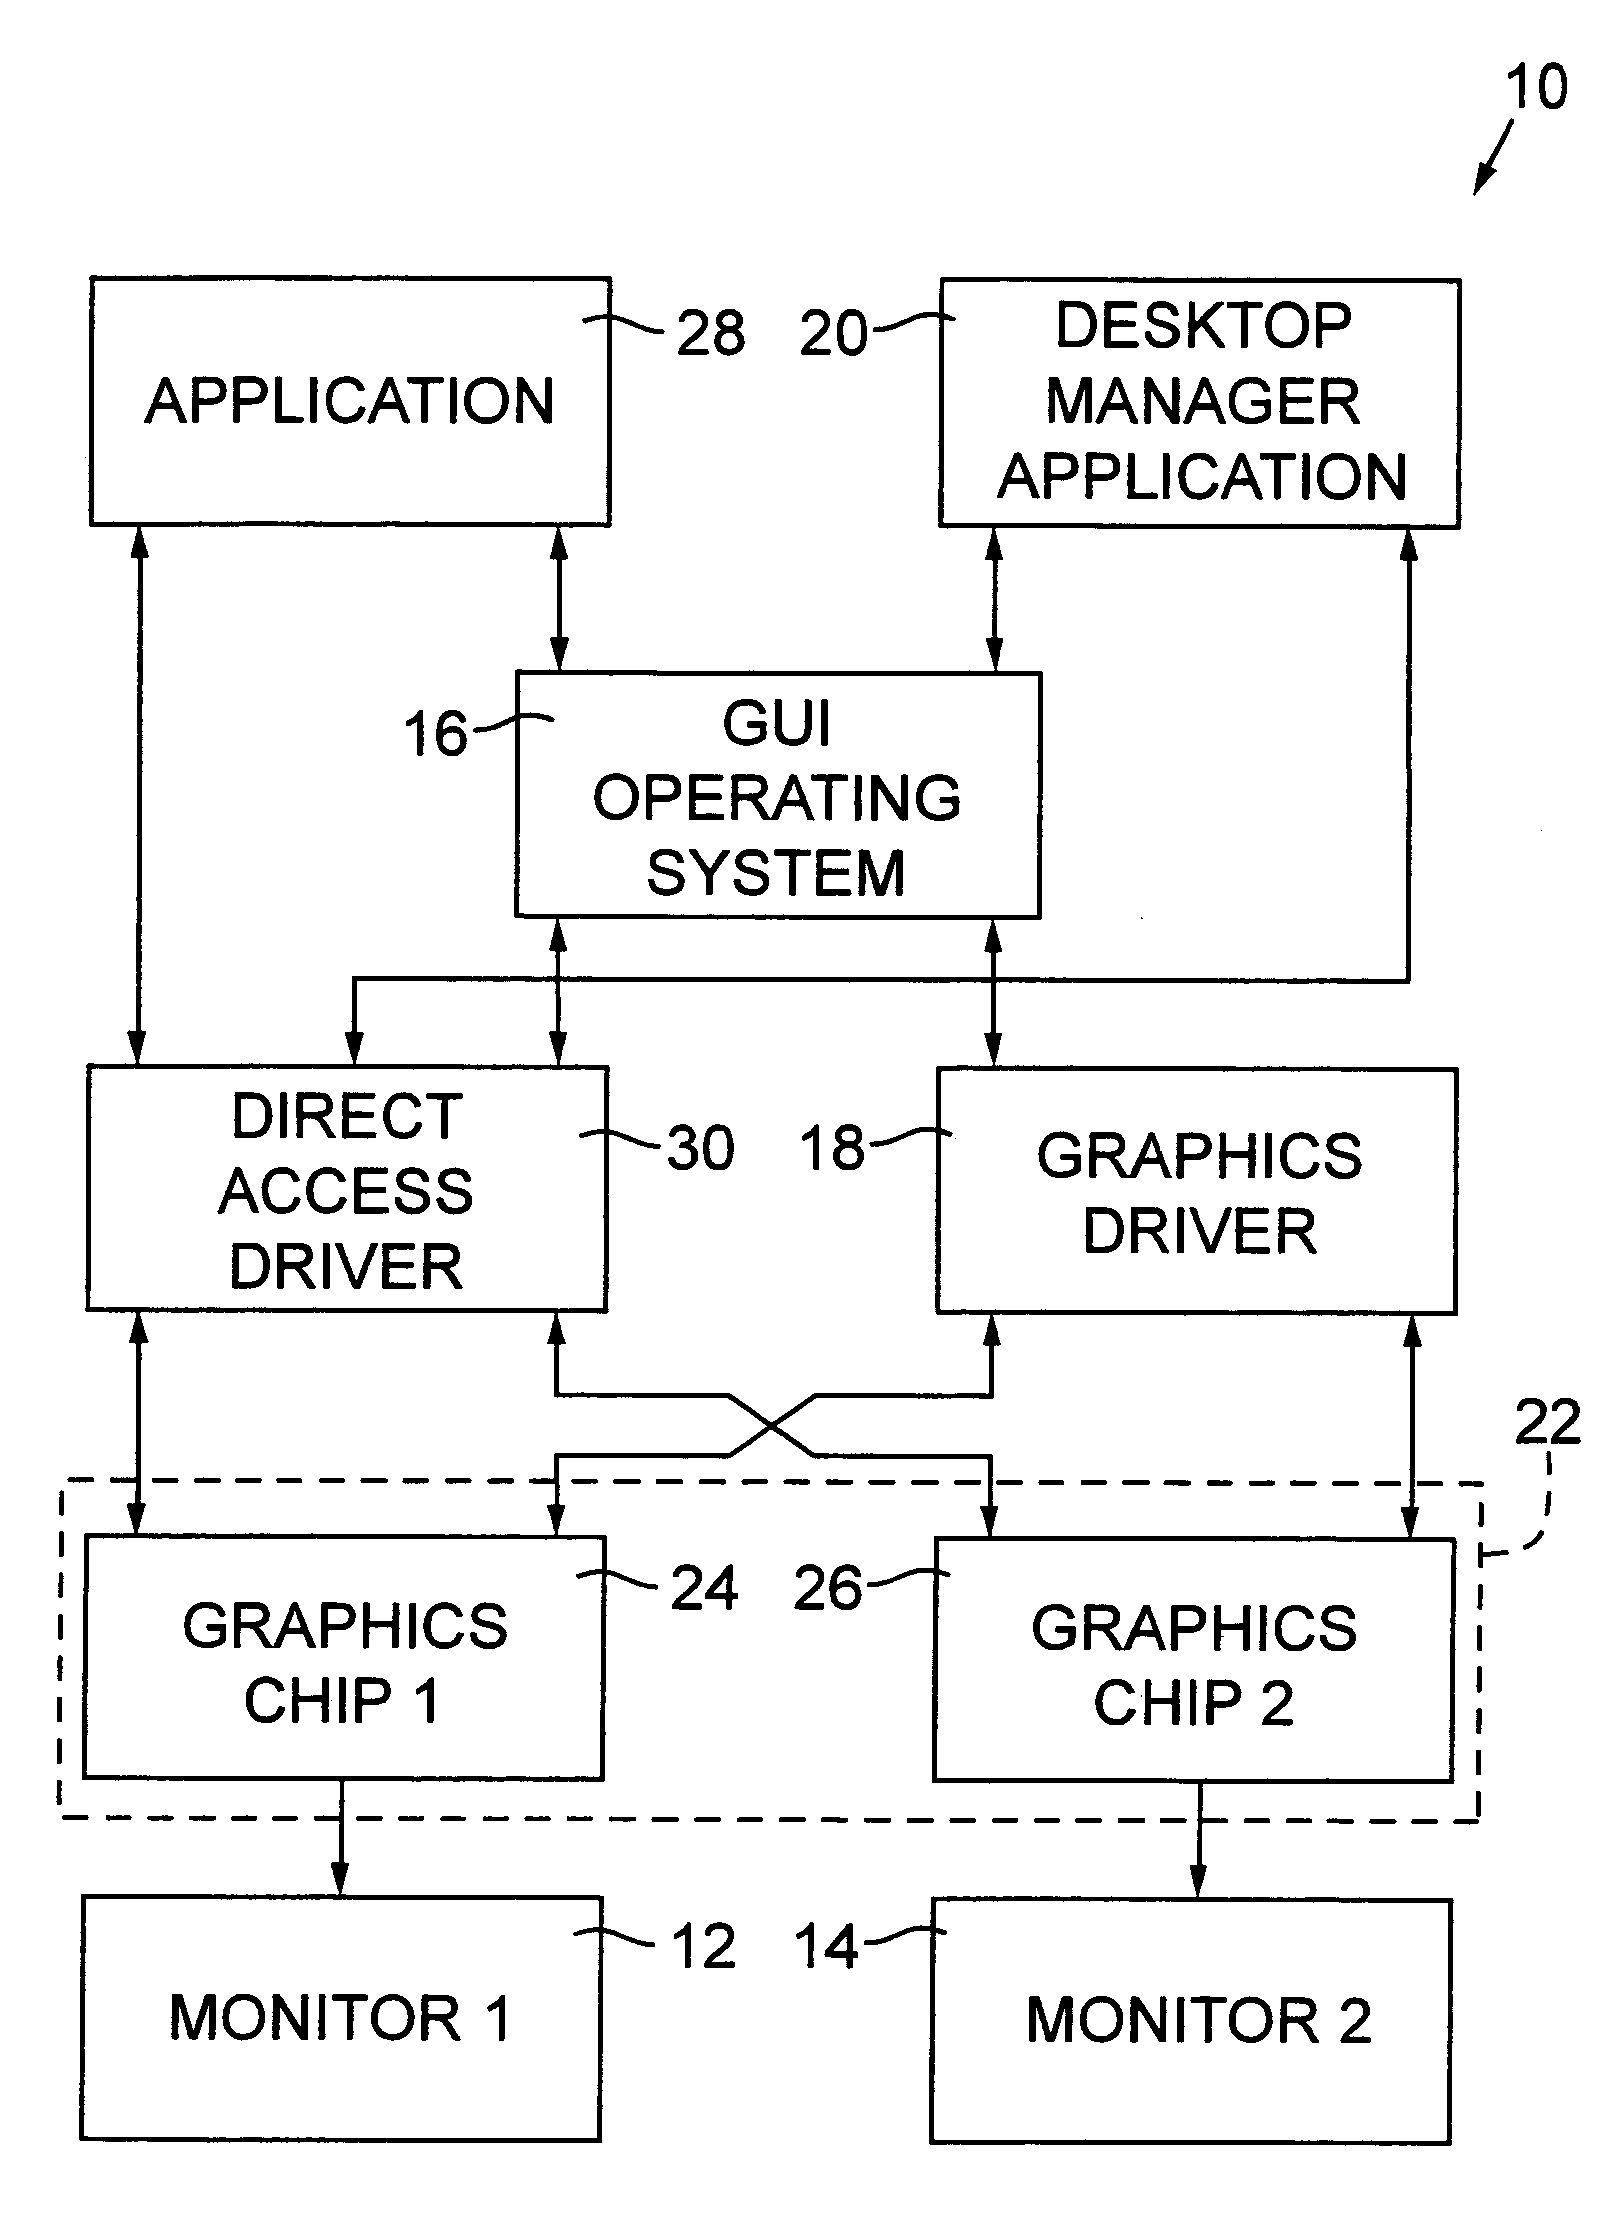 Method for displaying single monitor applications on multiple monitors driven by a personal computer